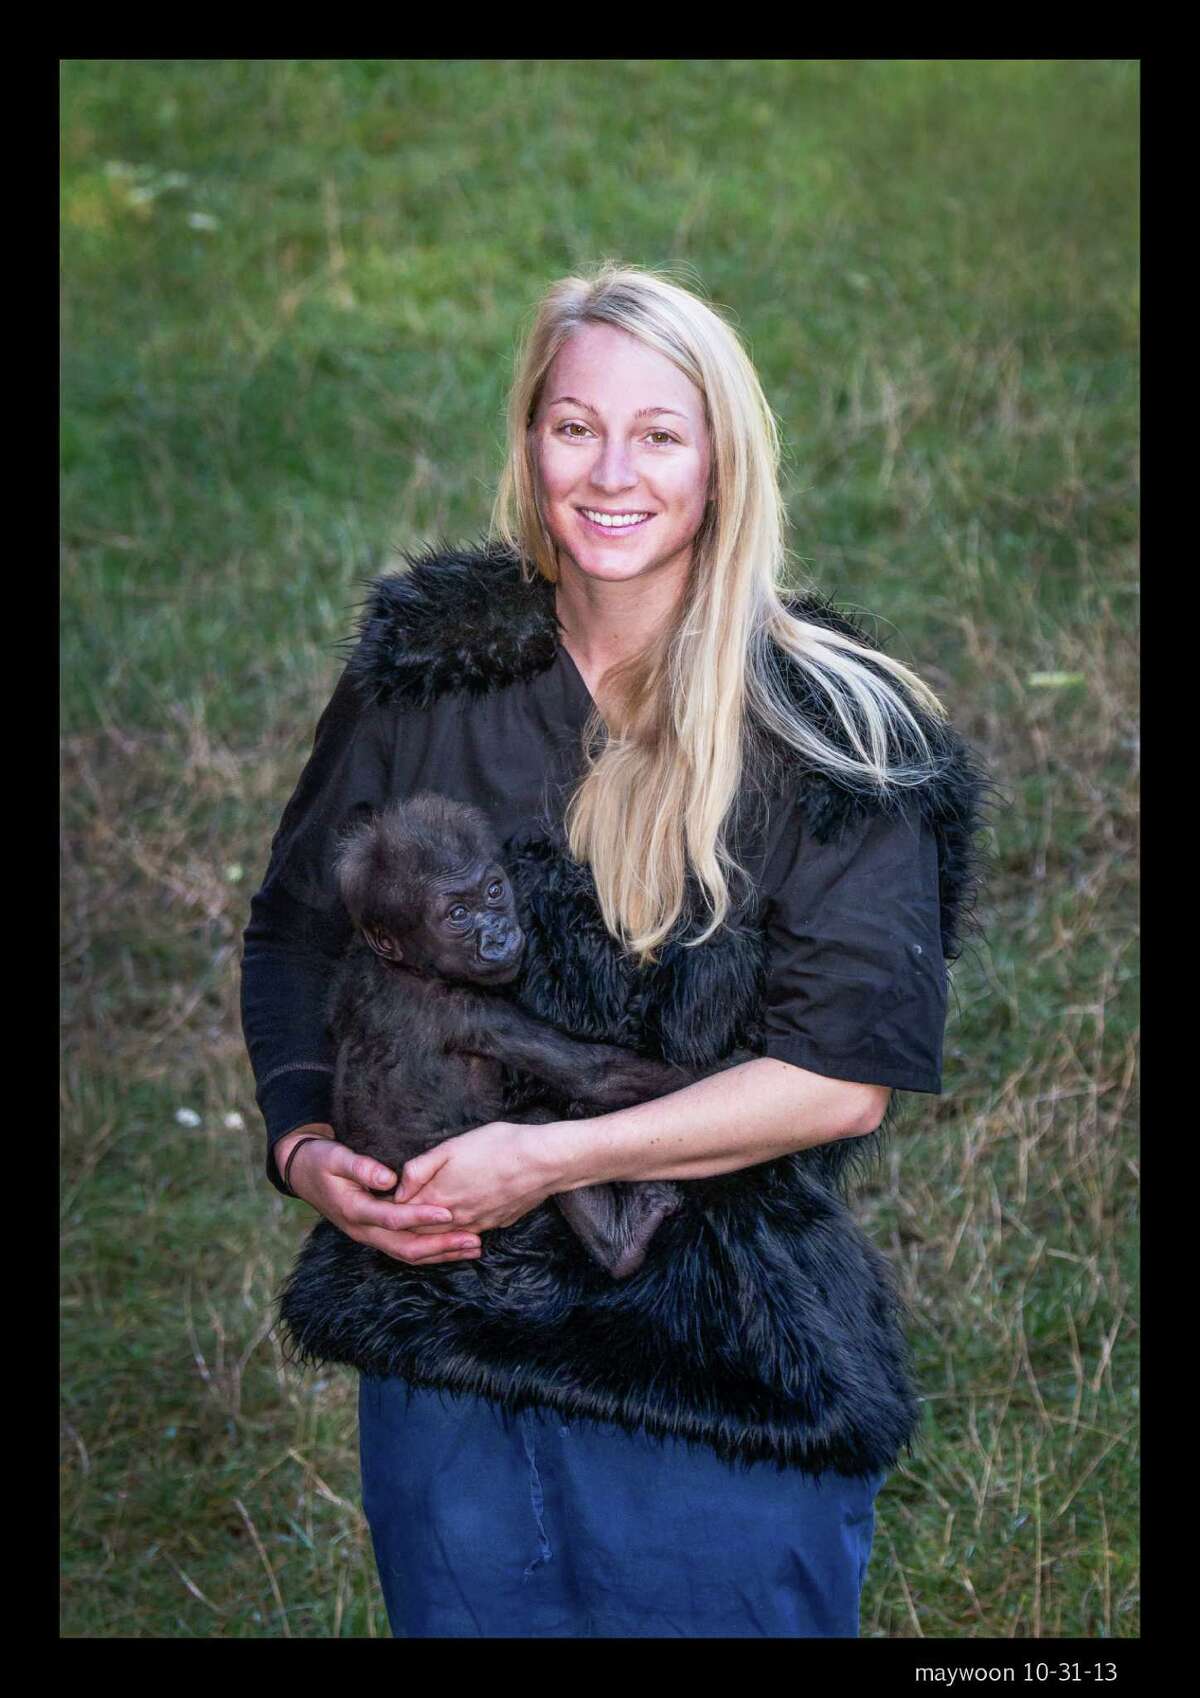 Animal keeper Kelly Blakemore plays with infant gorilla Kabibe at the San Francisco Zoo gorilla preserve on Oct. 31, 2013. Kabibe died in a tragic accident at the zoo earlier this month.